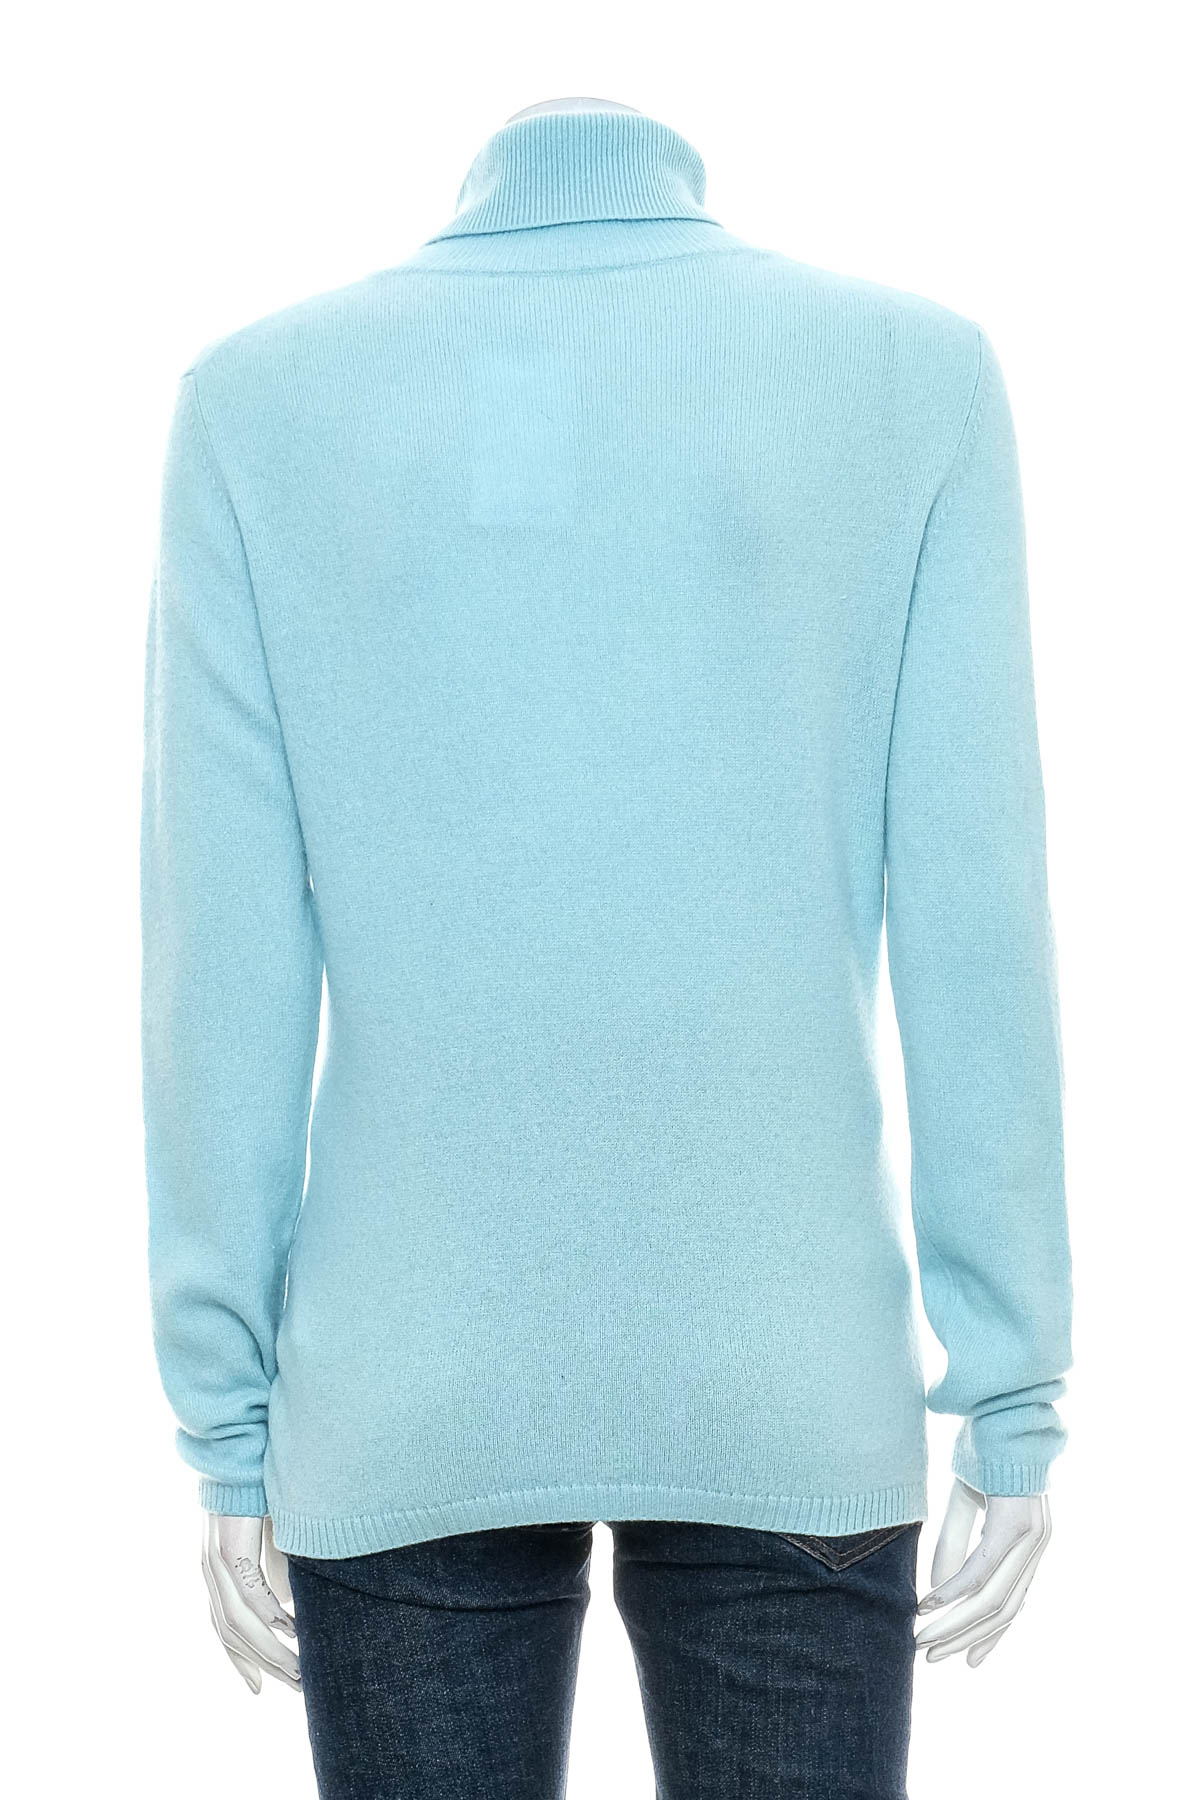 Women's sweater - Iy cashmere - 1